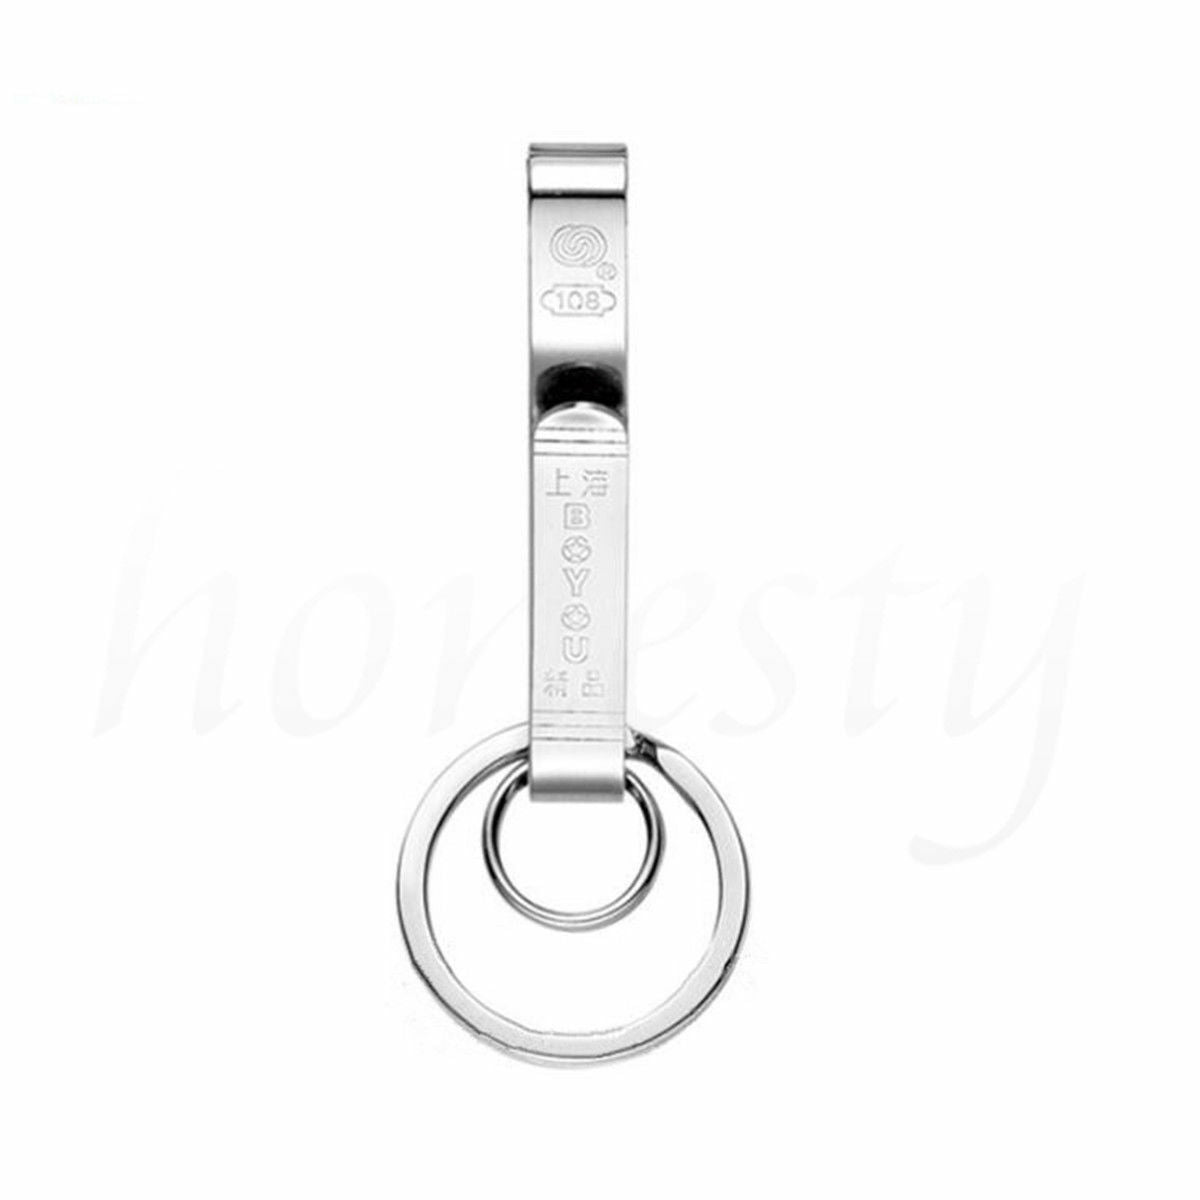 Stainless Steel Compact Quick Release Keychain Belt Clip Key Ring Holder